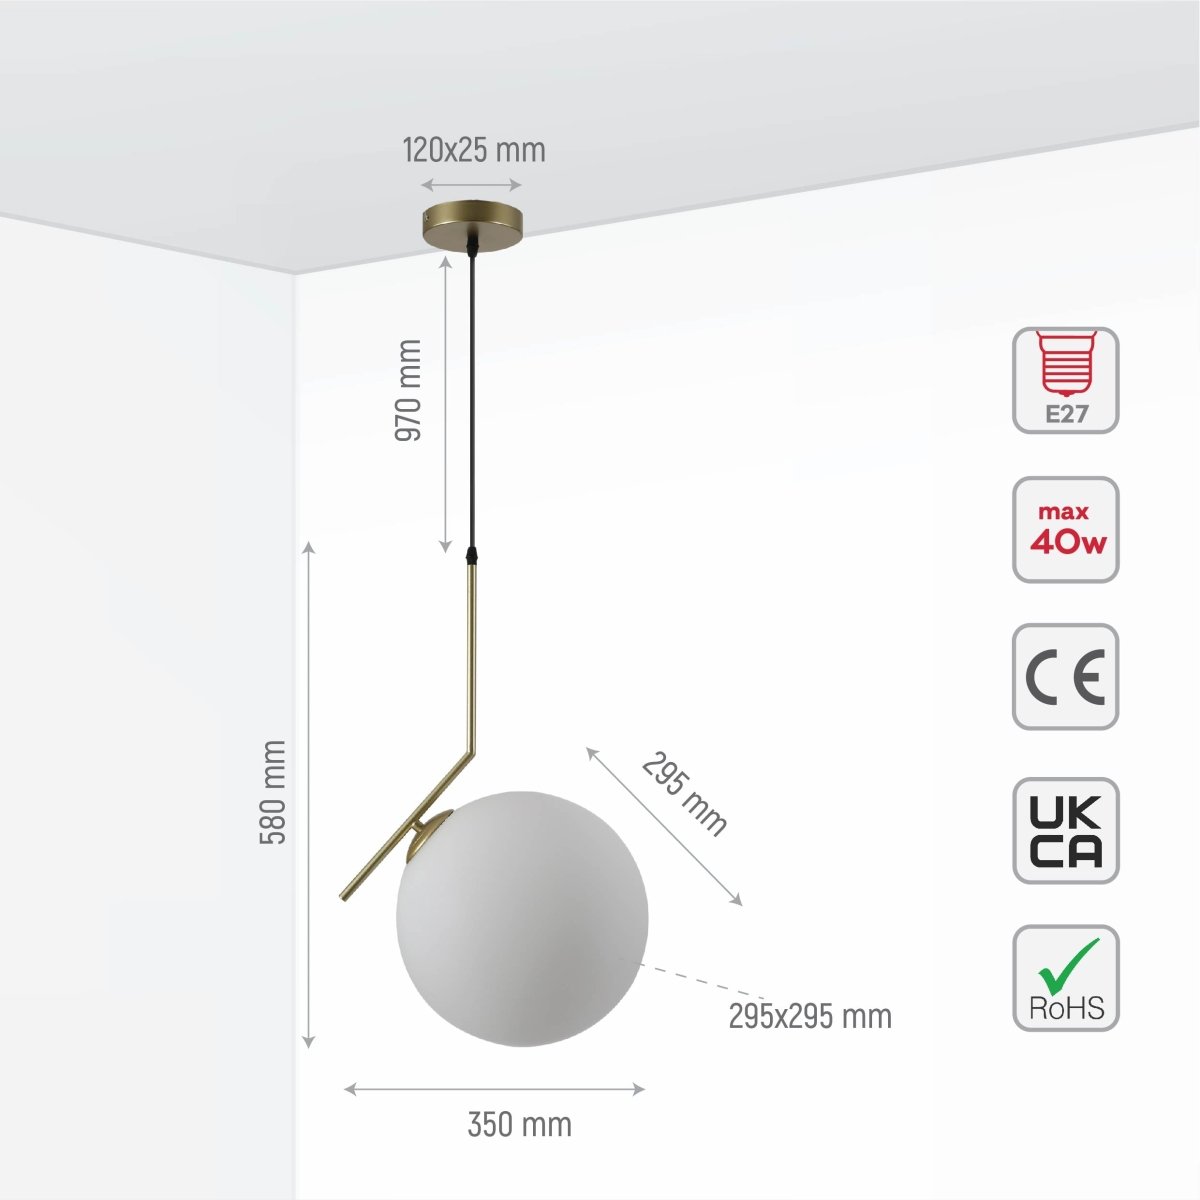 Size and specs of Antique Brass Metal Opal White Glass Globe Pendant Ceiling Light D200 with E27 Fitting | TEKLED 158-19662